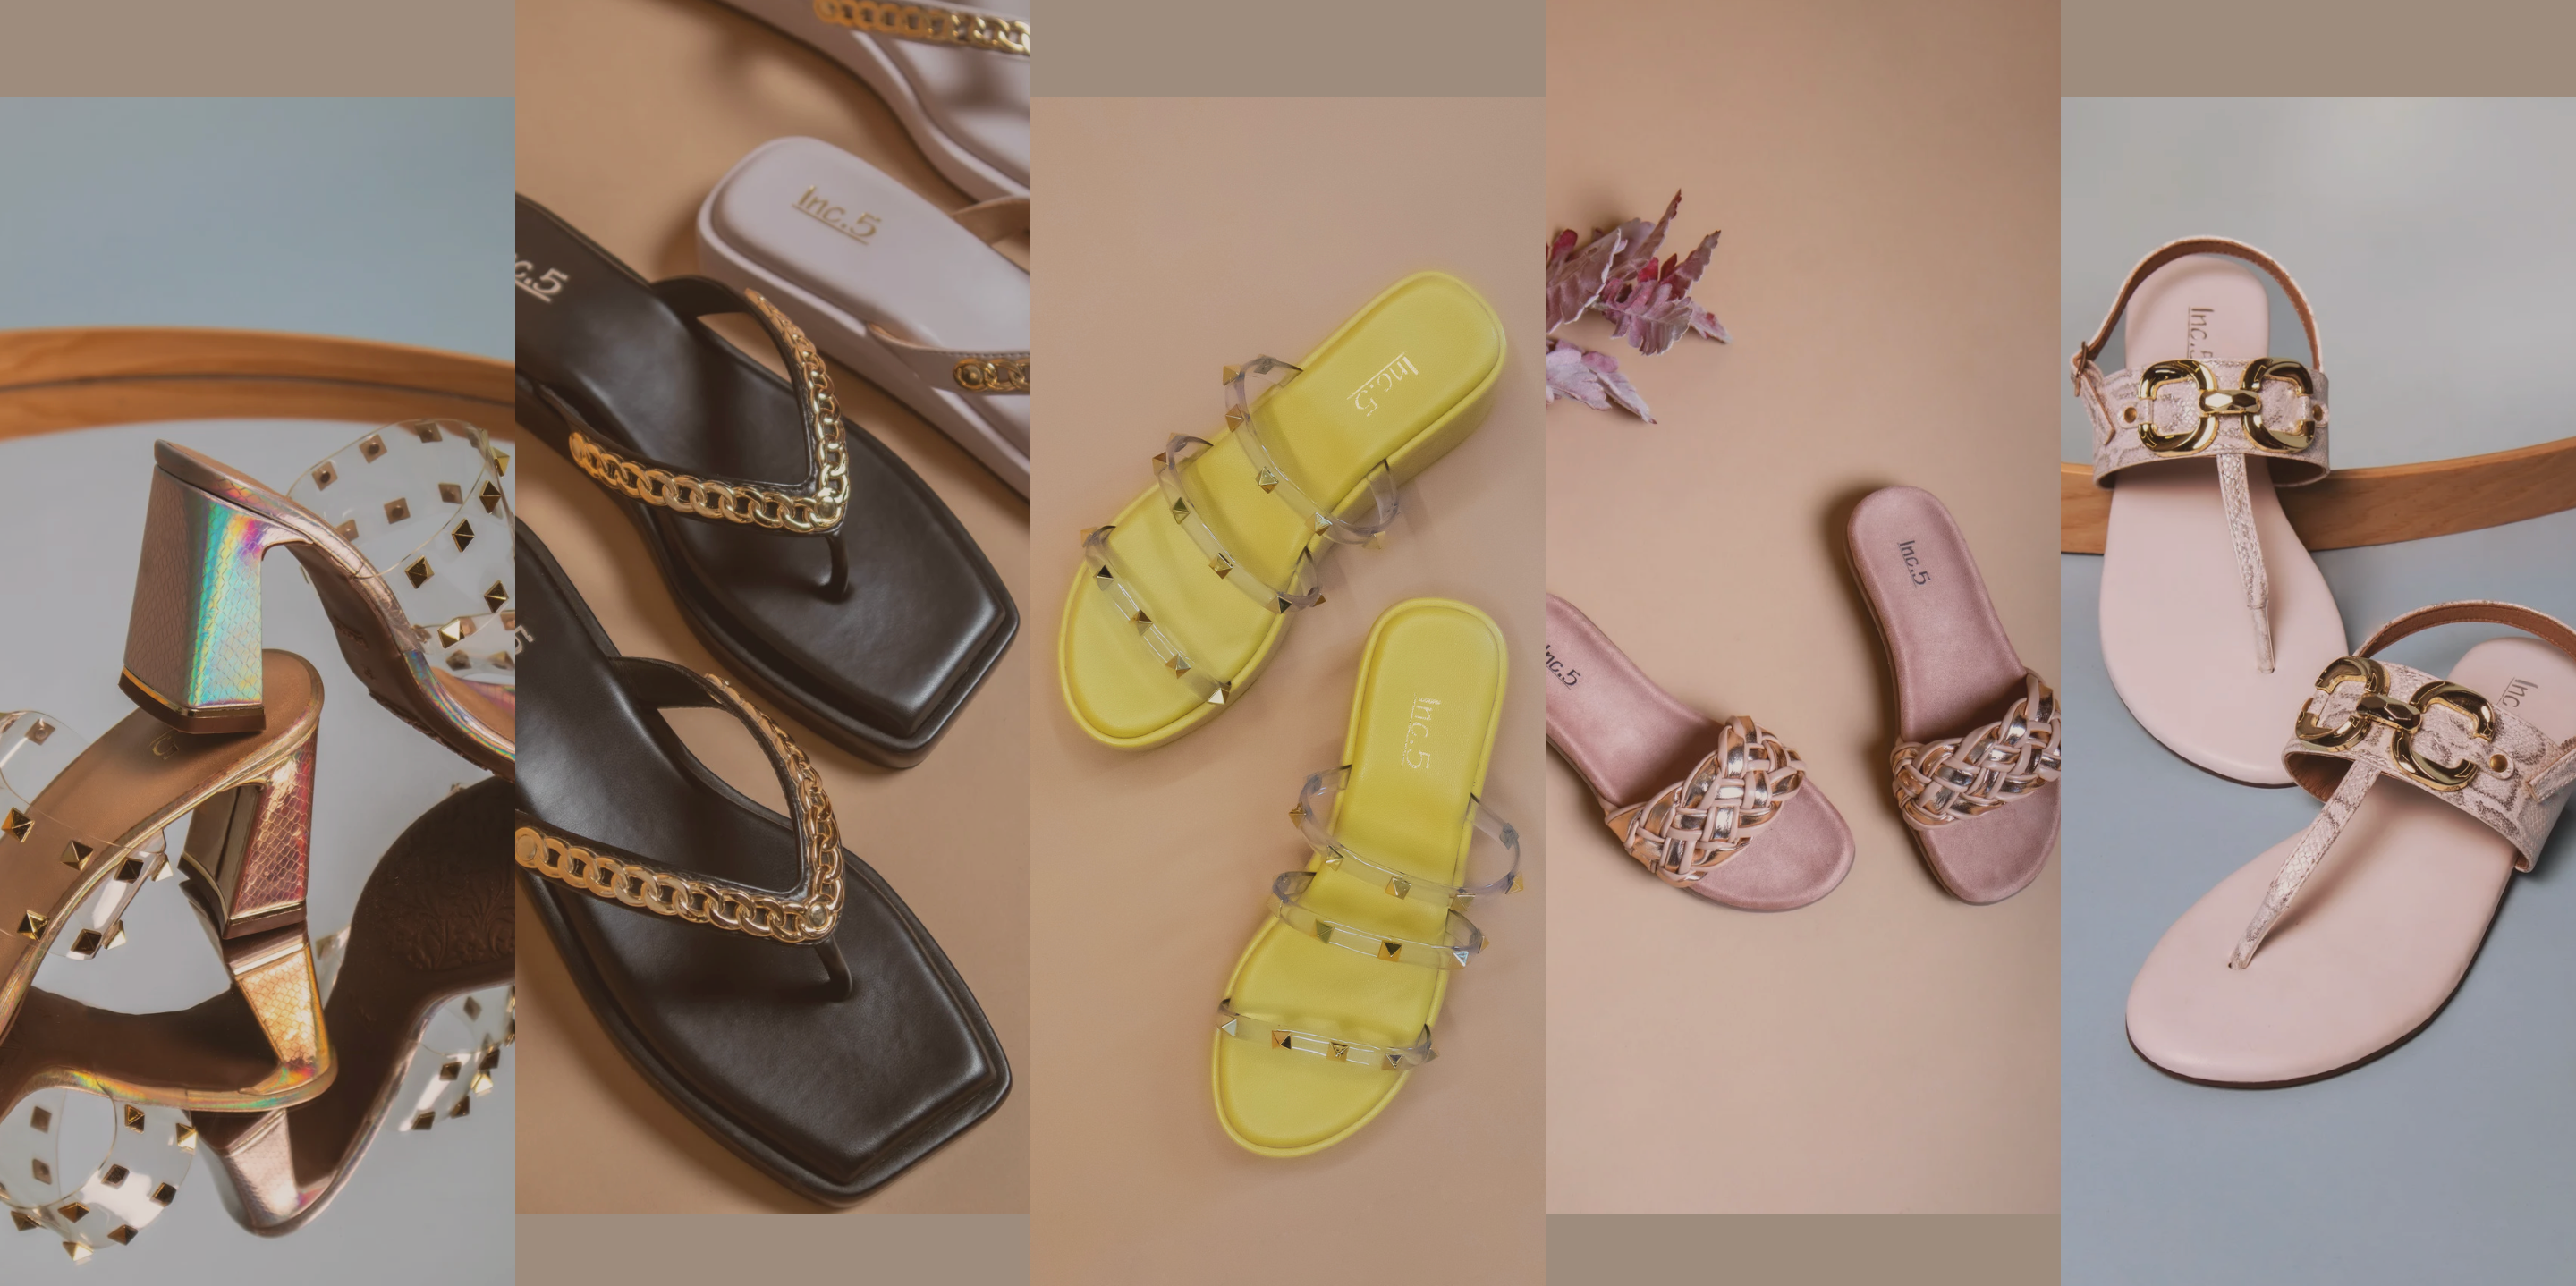 Buy Fashion Sandals for Women Online at Liberty Shoes